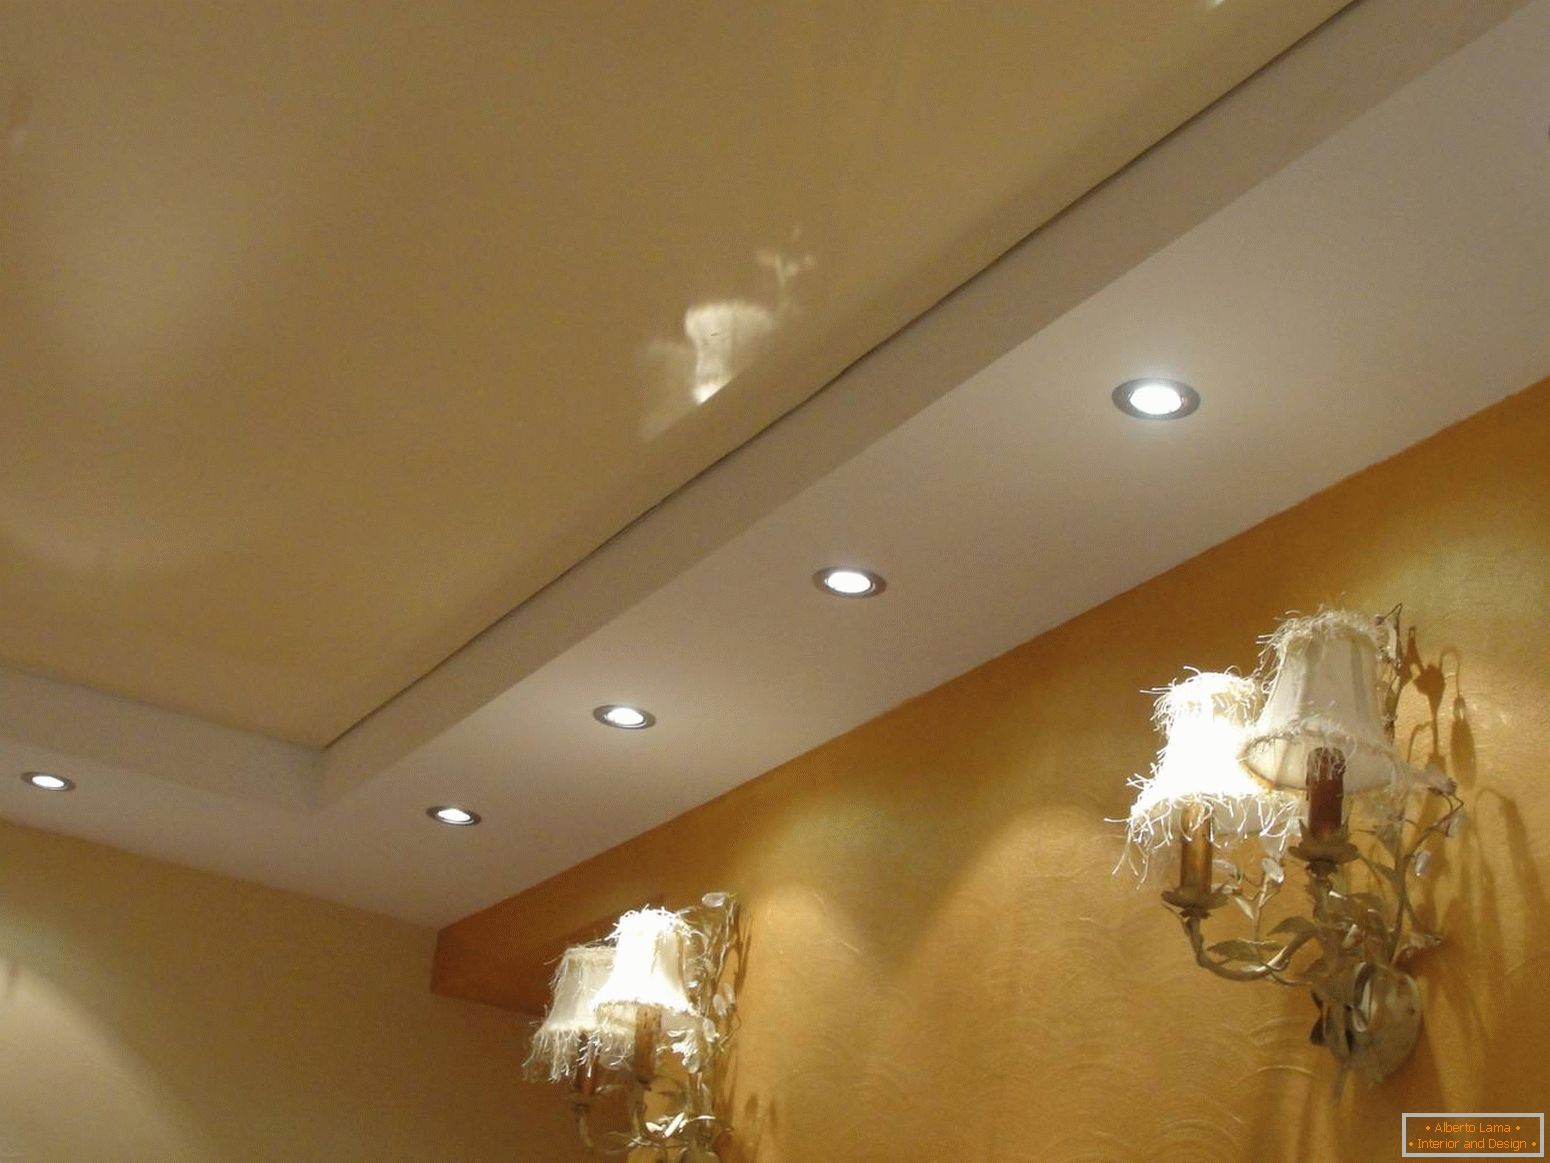 The ceiling is a soft beige shade with correctly selected lighting.